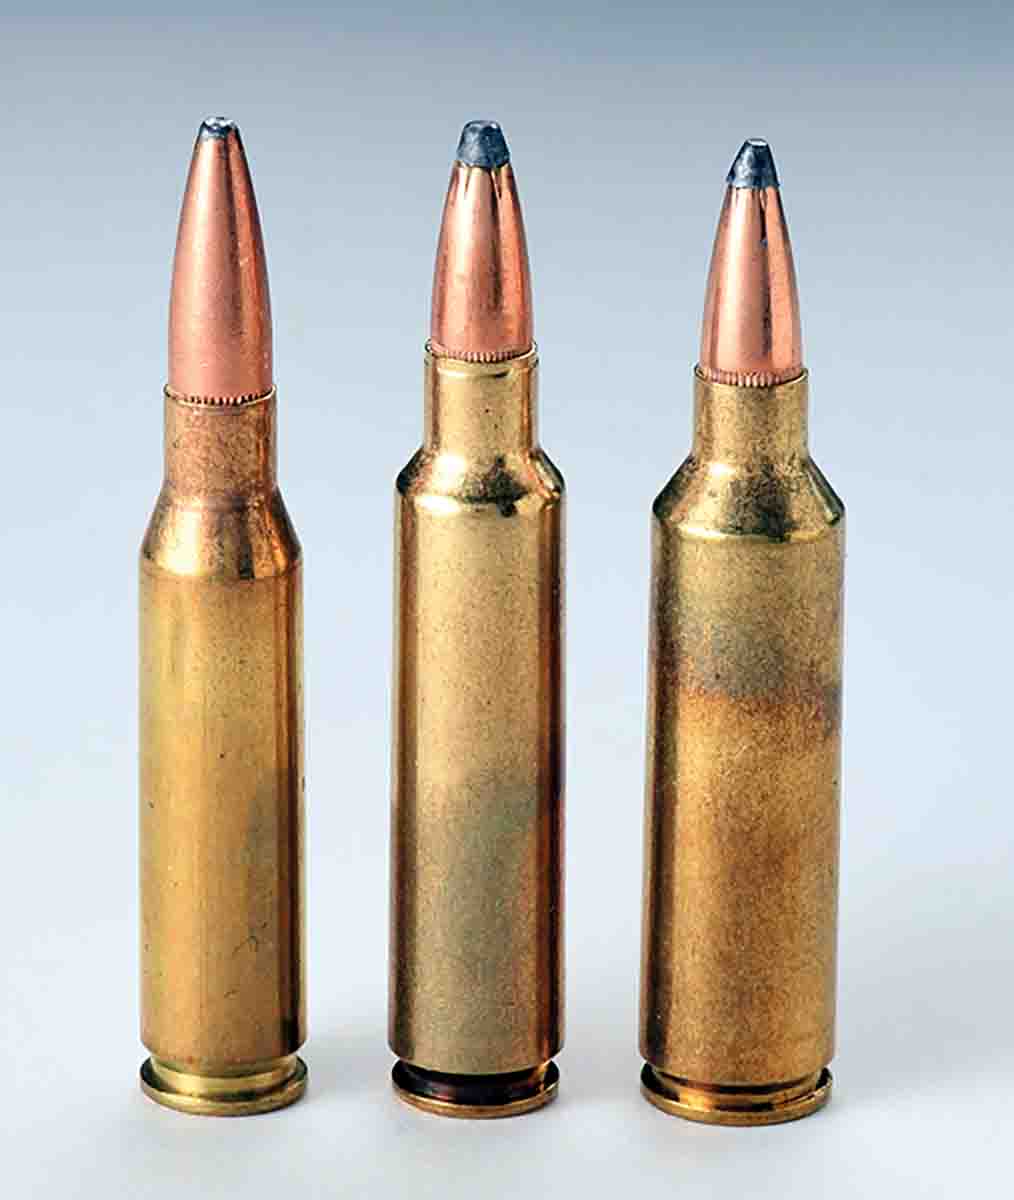 These three 7mm cartridges were designed for the same short action length (left to right): the 7mm-08 Remington, .284 Winchester and 7mm WSM. The last two require more bullet intrusion into the powder space.